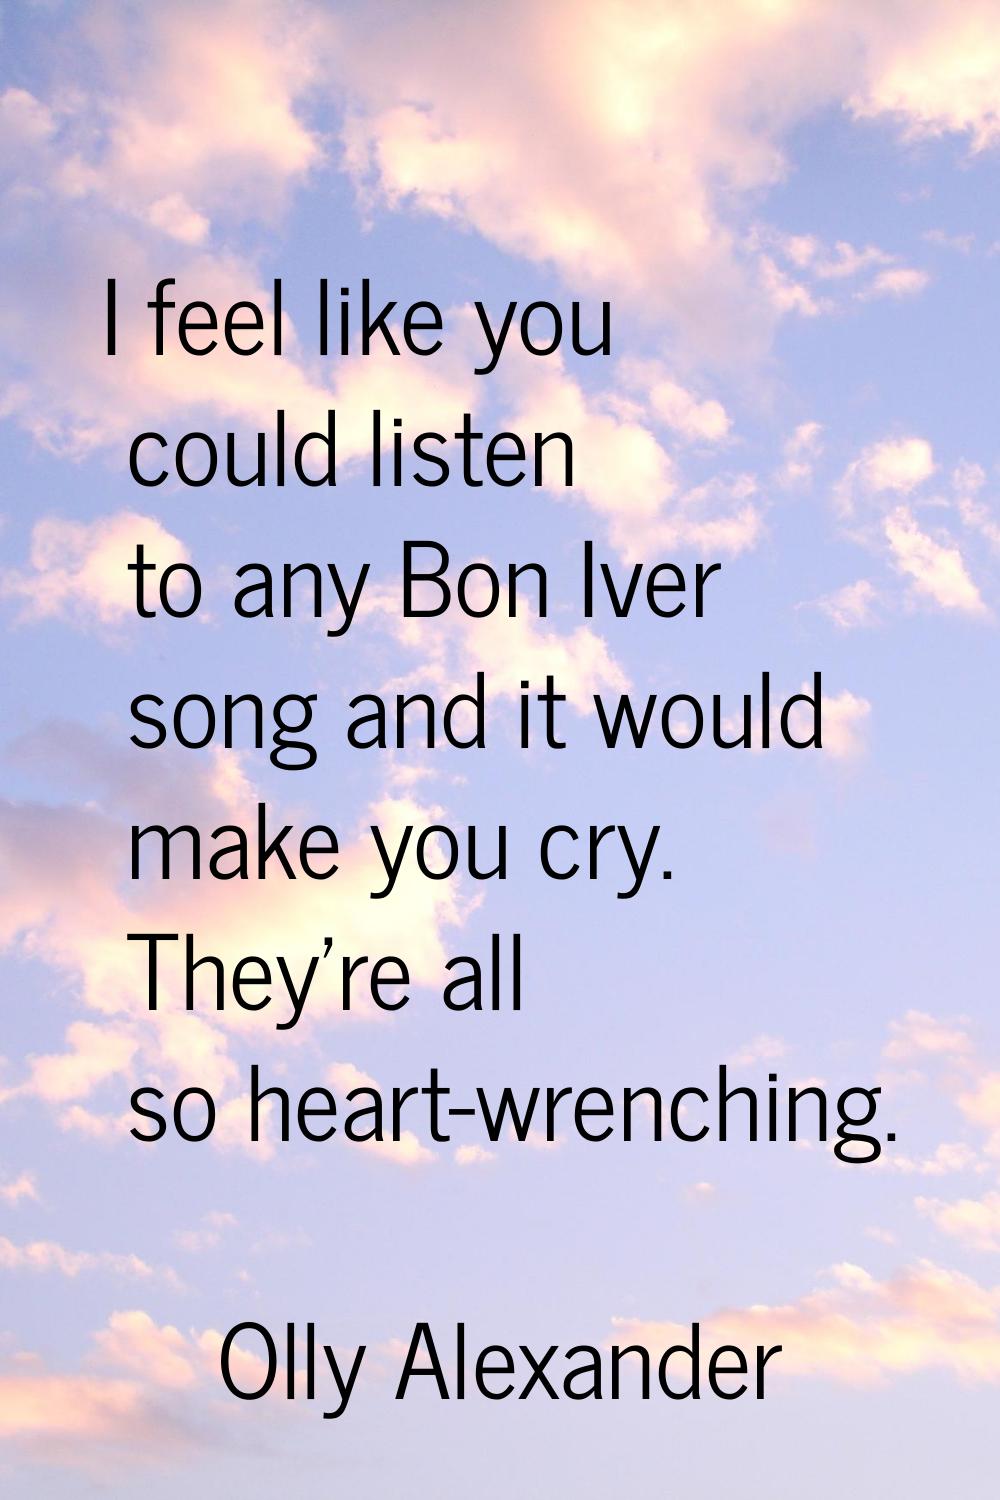 I feel like you could listen to any Bon Iver song and it would make you cry. They're all so heart-w